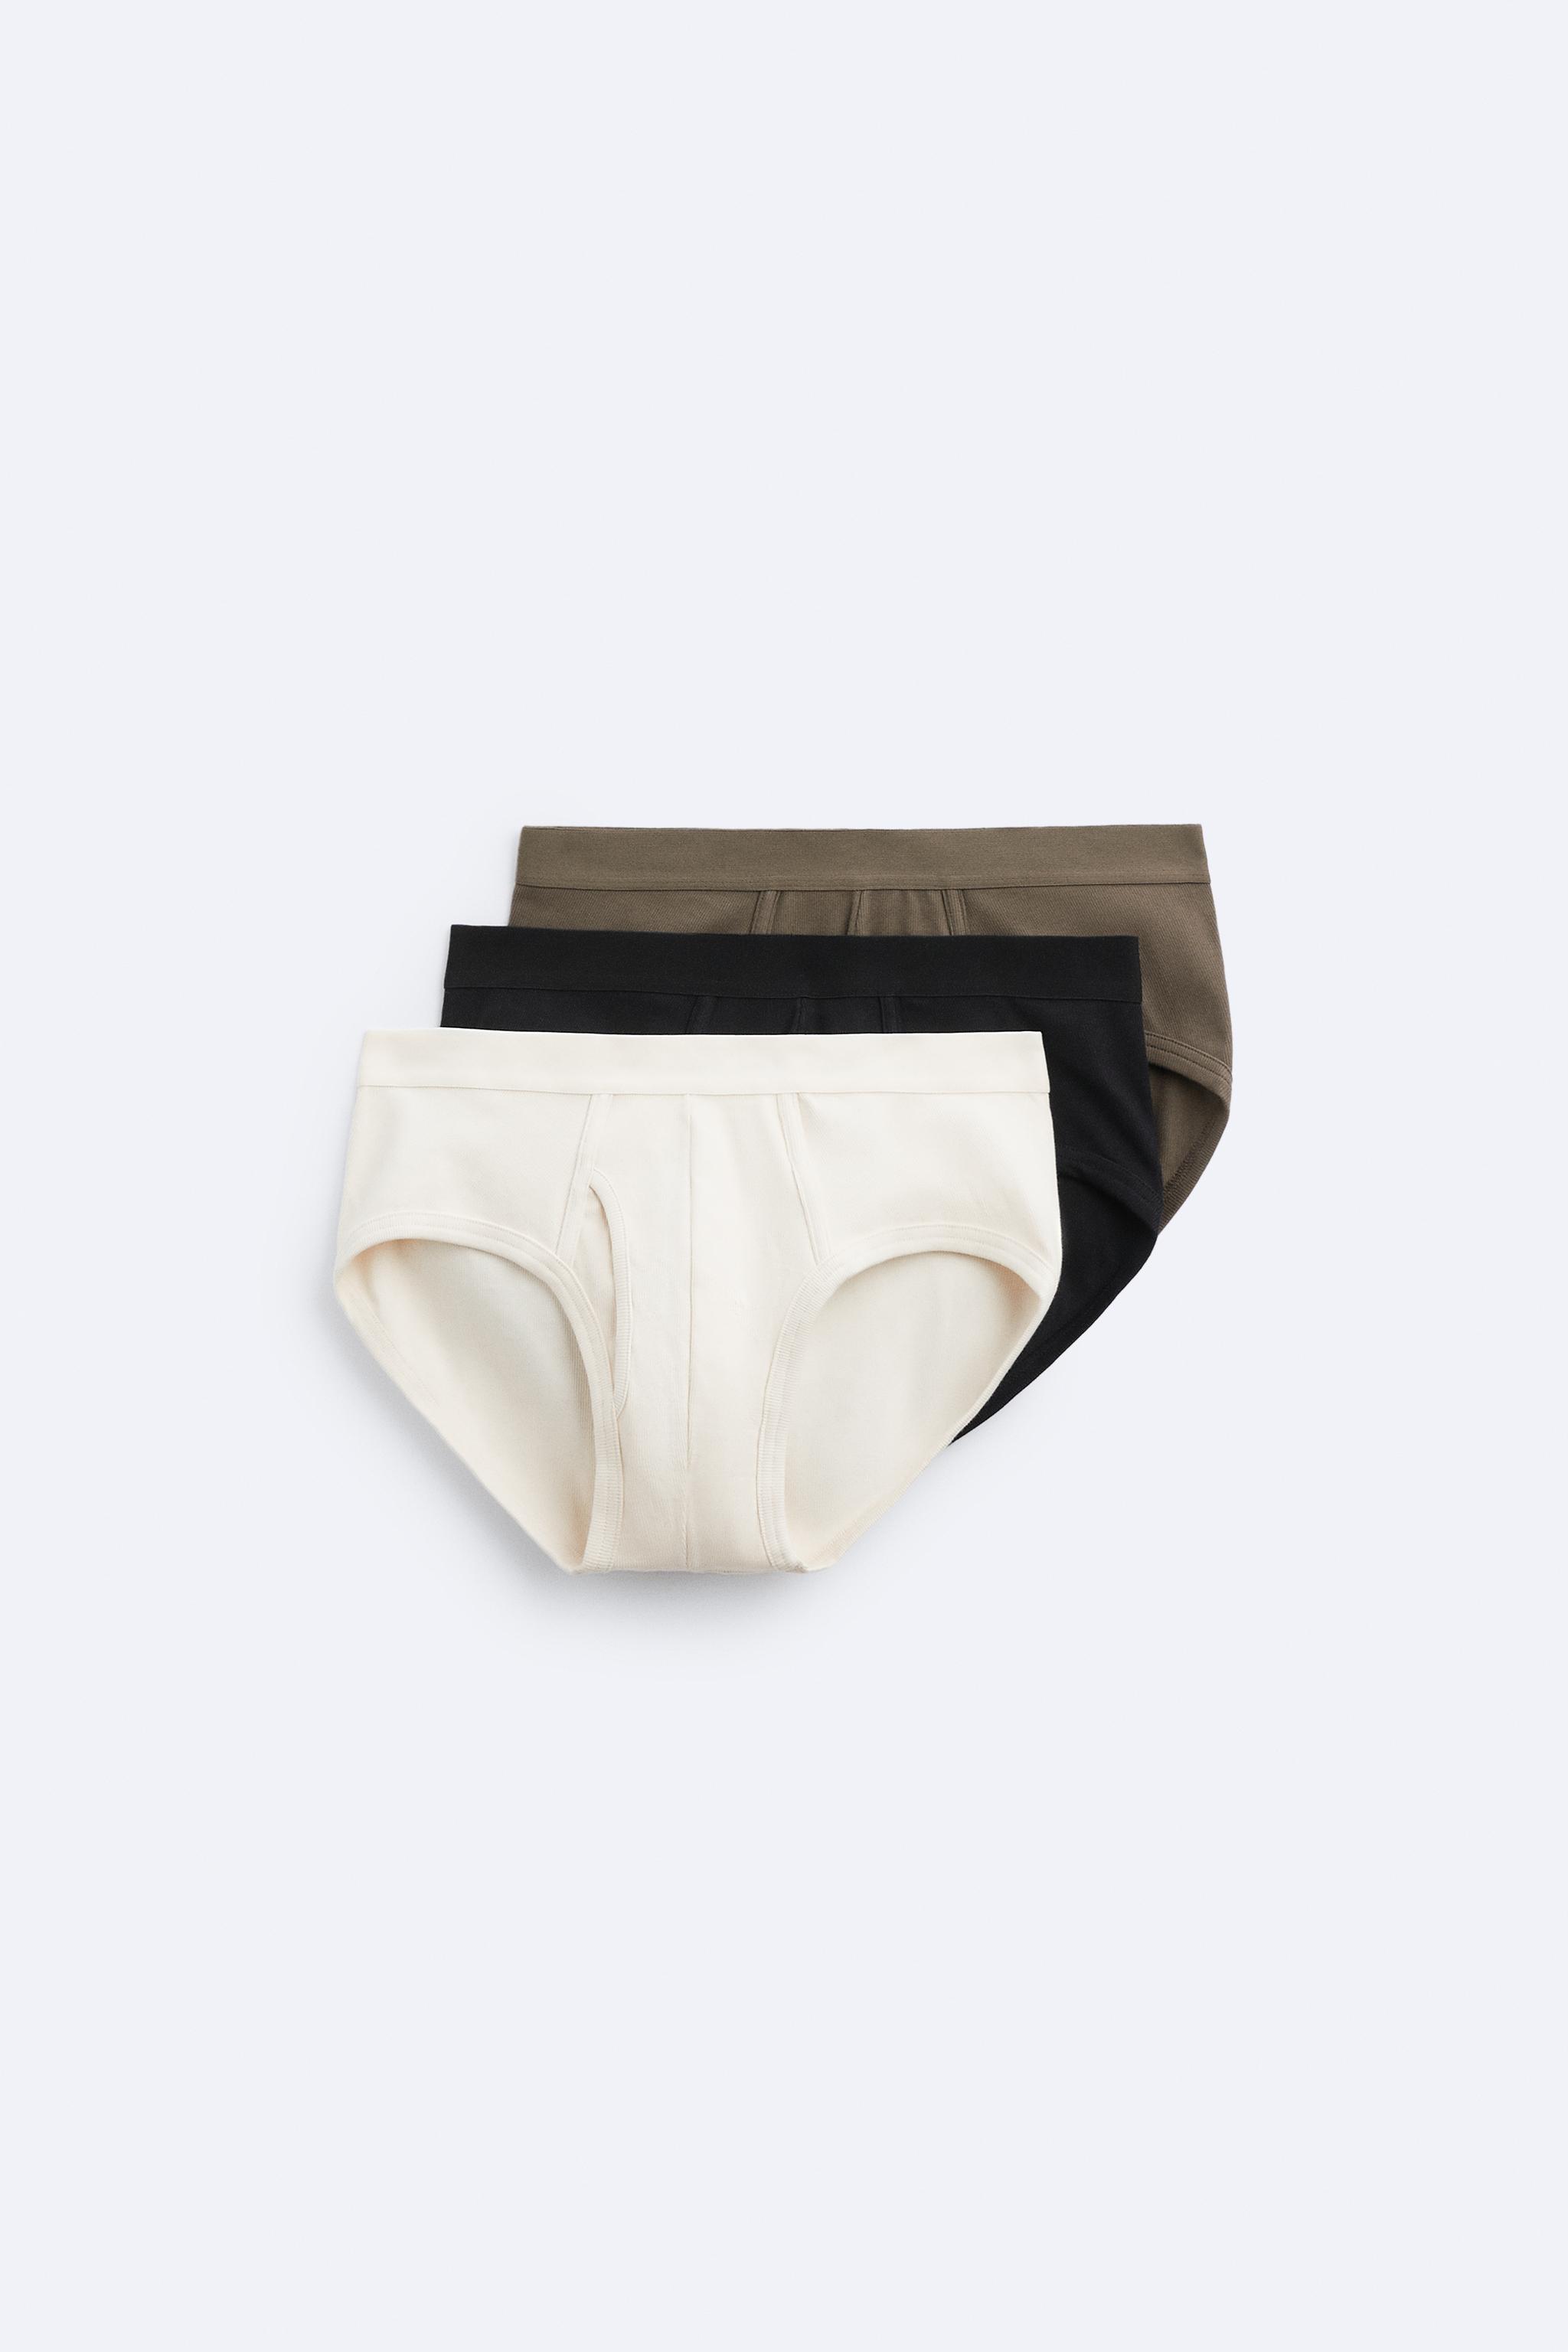 Oluwafunlola on X: Restocked Zara Boxers Brand: Turkey 🇹🇷 Size: Medium -  3 Xtra Large. Price : N2500 Each Wholesale deal available Send a DM Please  help me retweet my customers are